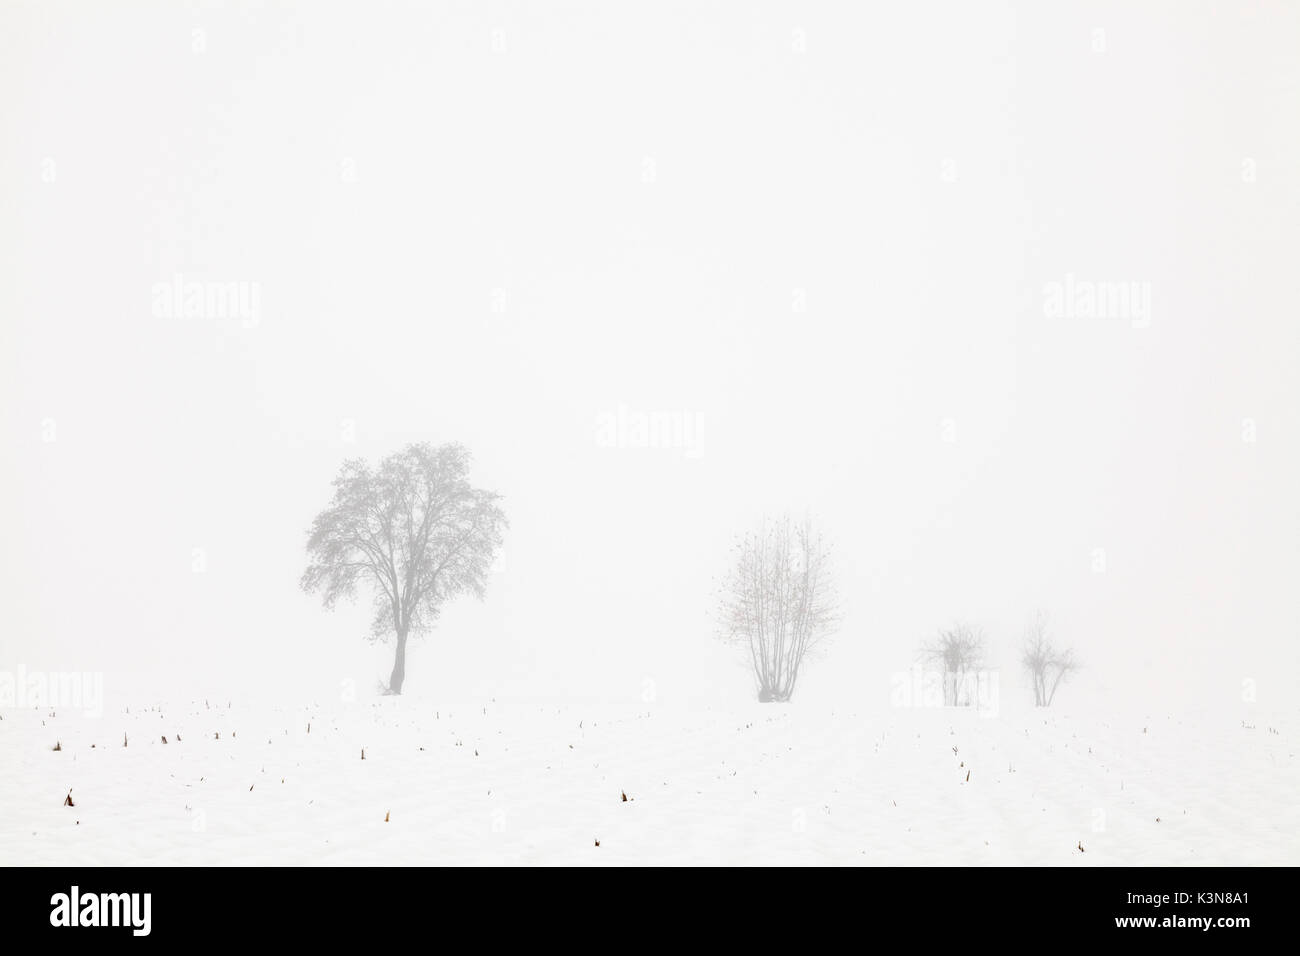 Soncino, Cremona province, Lombardy, Italy. Trees in countryside in winter. Stock Photo